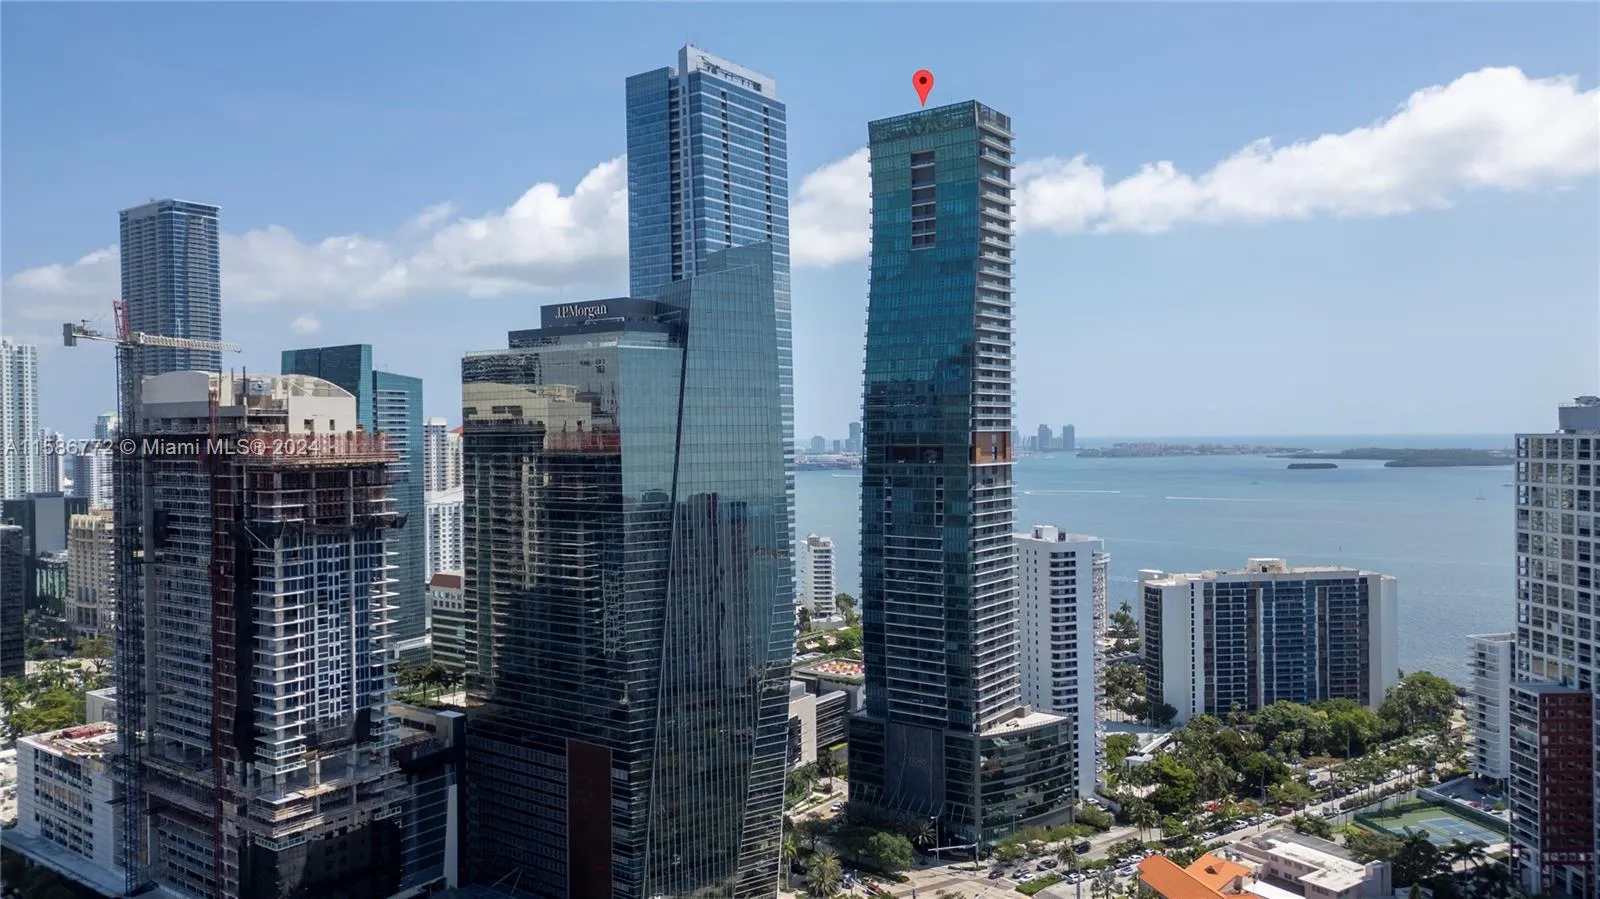 Welcome to the Brickell Ave, Welcome to the  Echo Brickell Building.